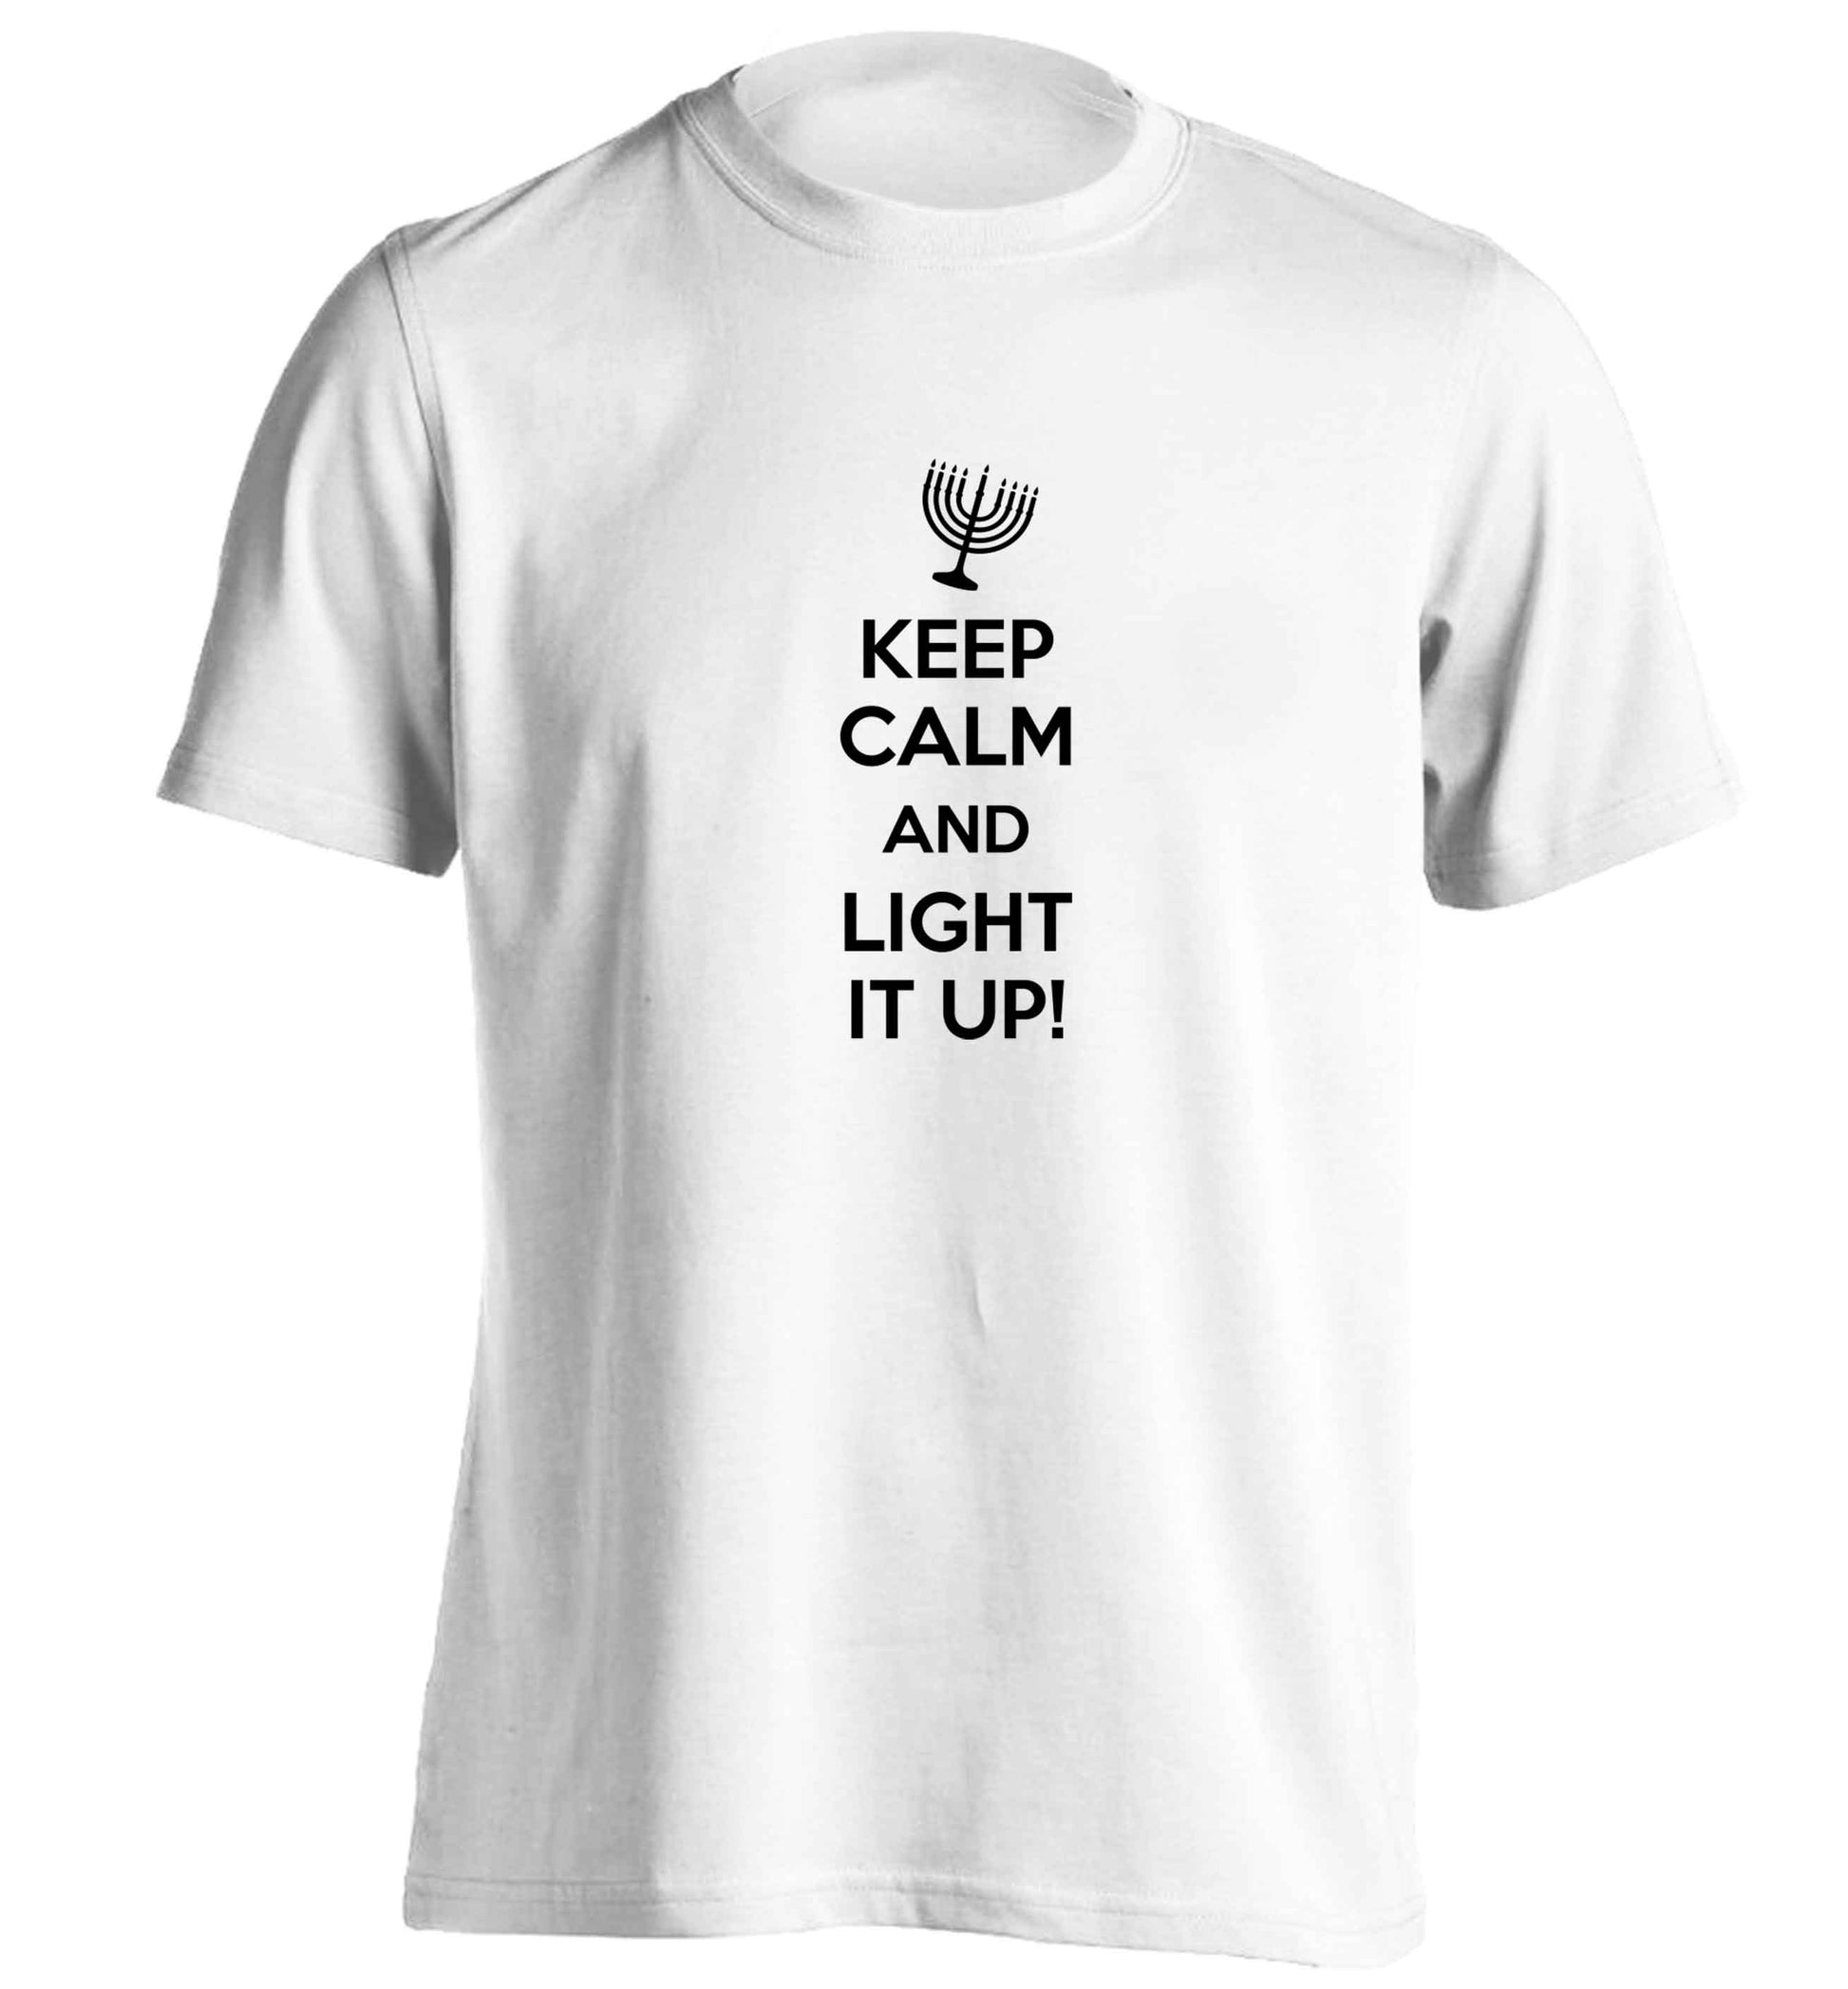 Keep calm and light it up adults unisex white Tshirt 2XL